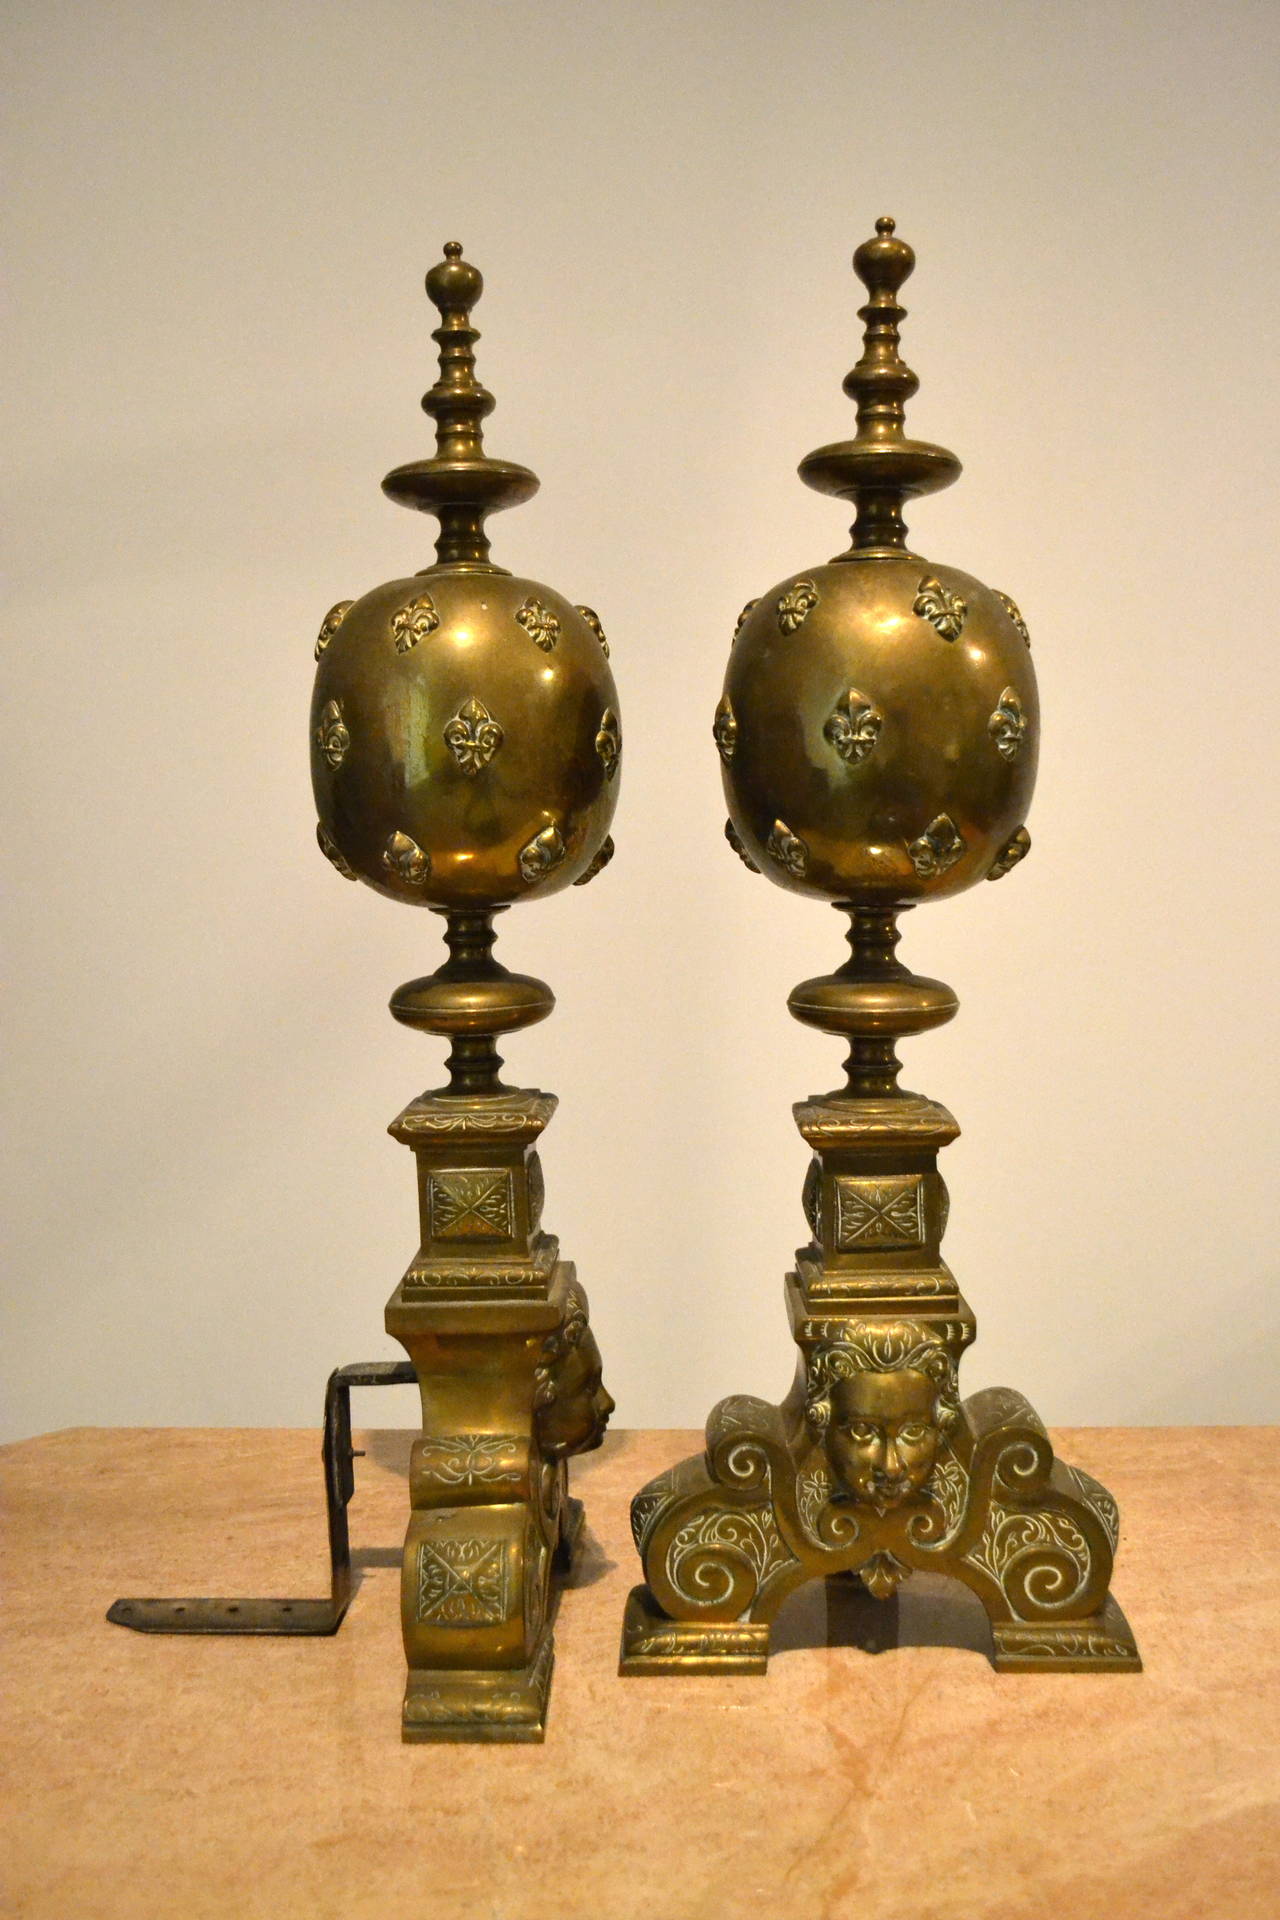 Pair of late 19th century to early 20th century impressive brass andirons with a fleur de lys motif and cherub faces at their bases.